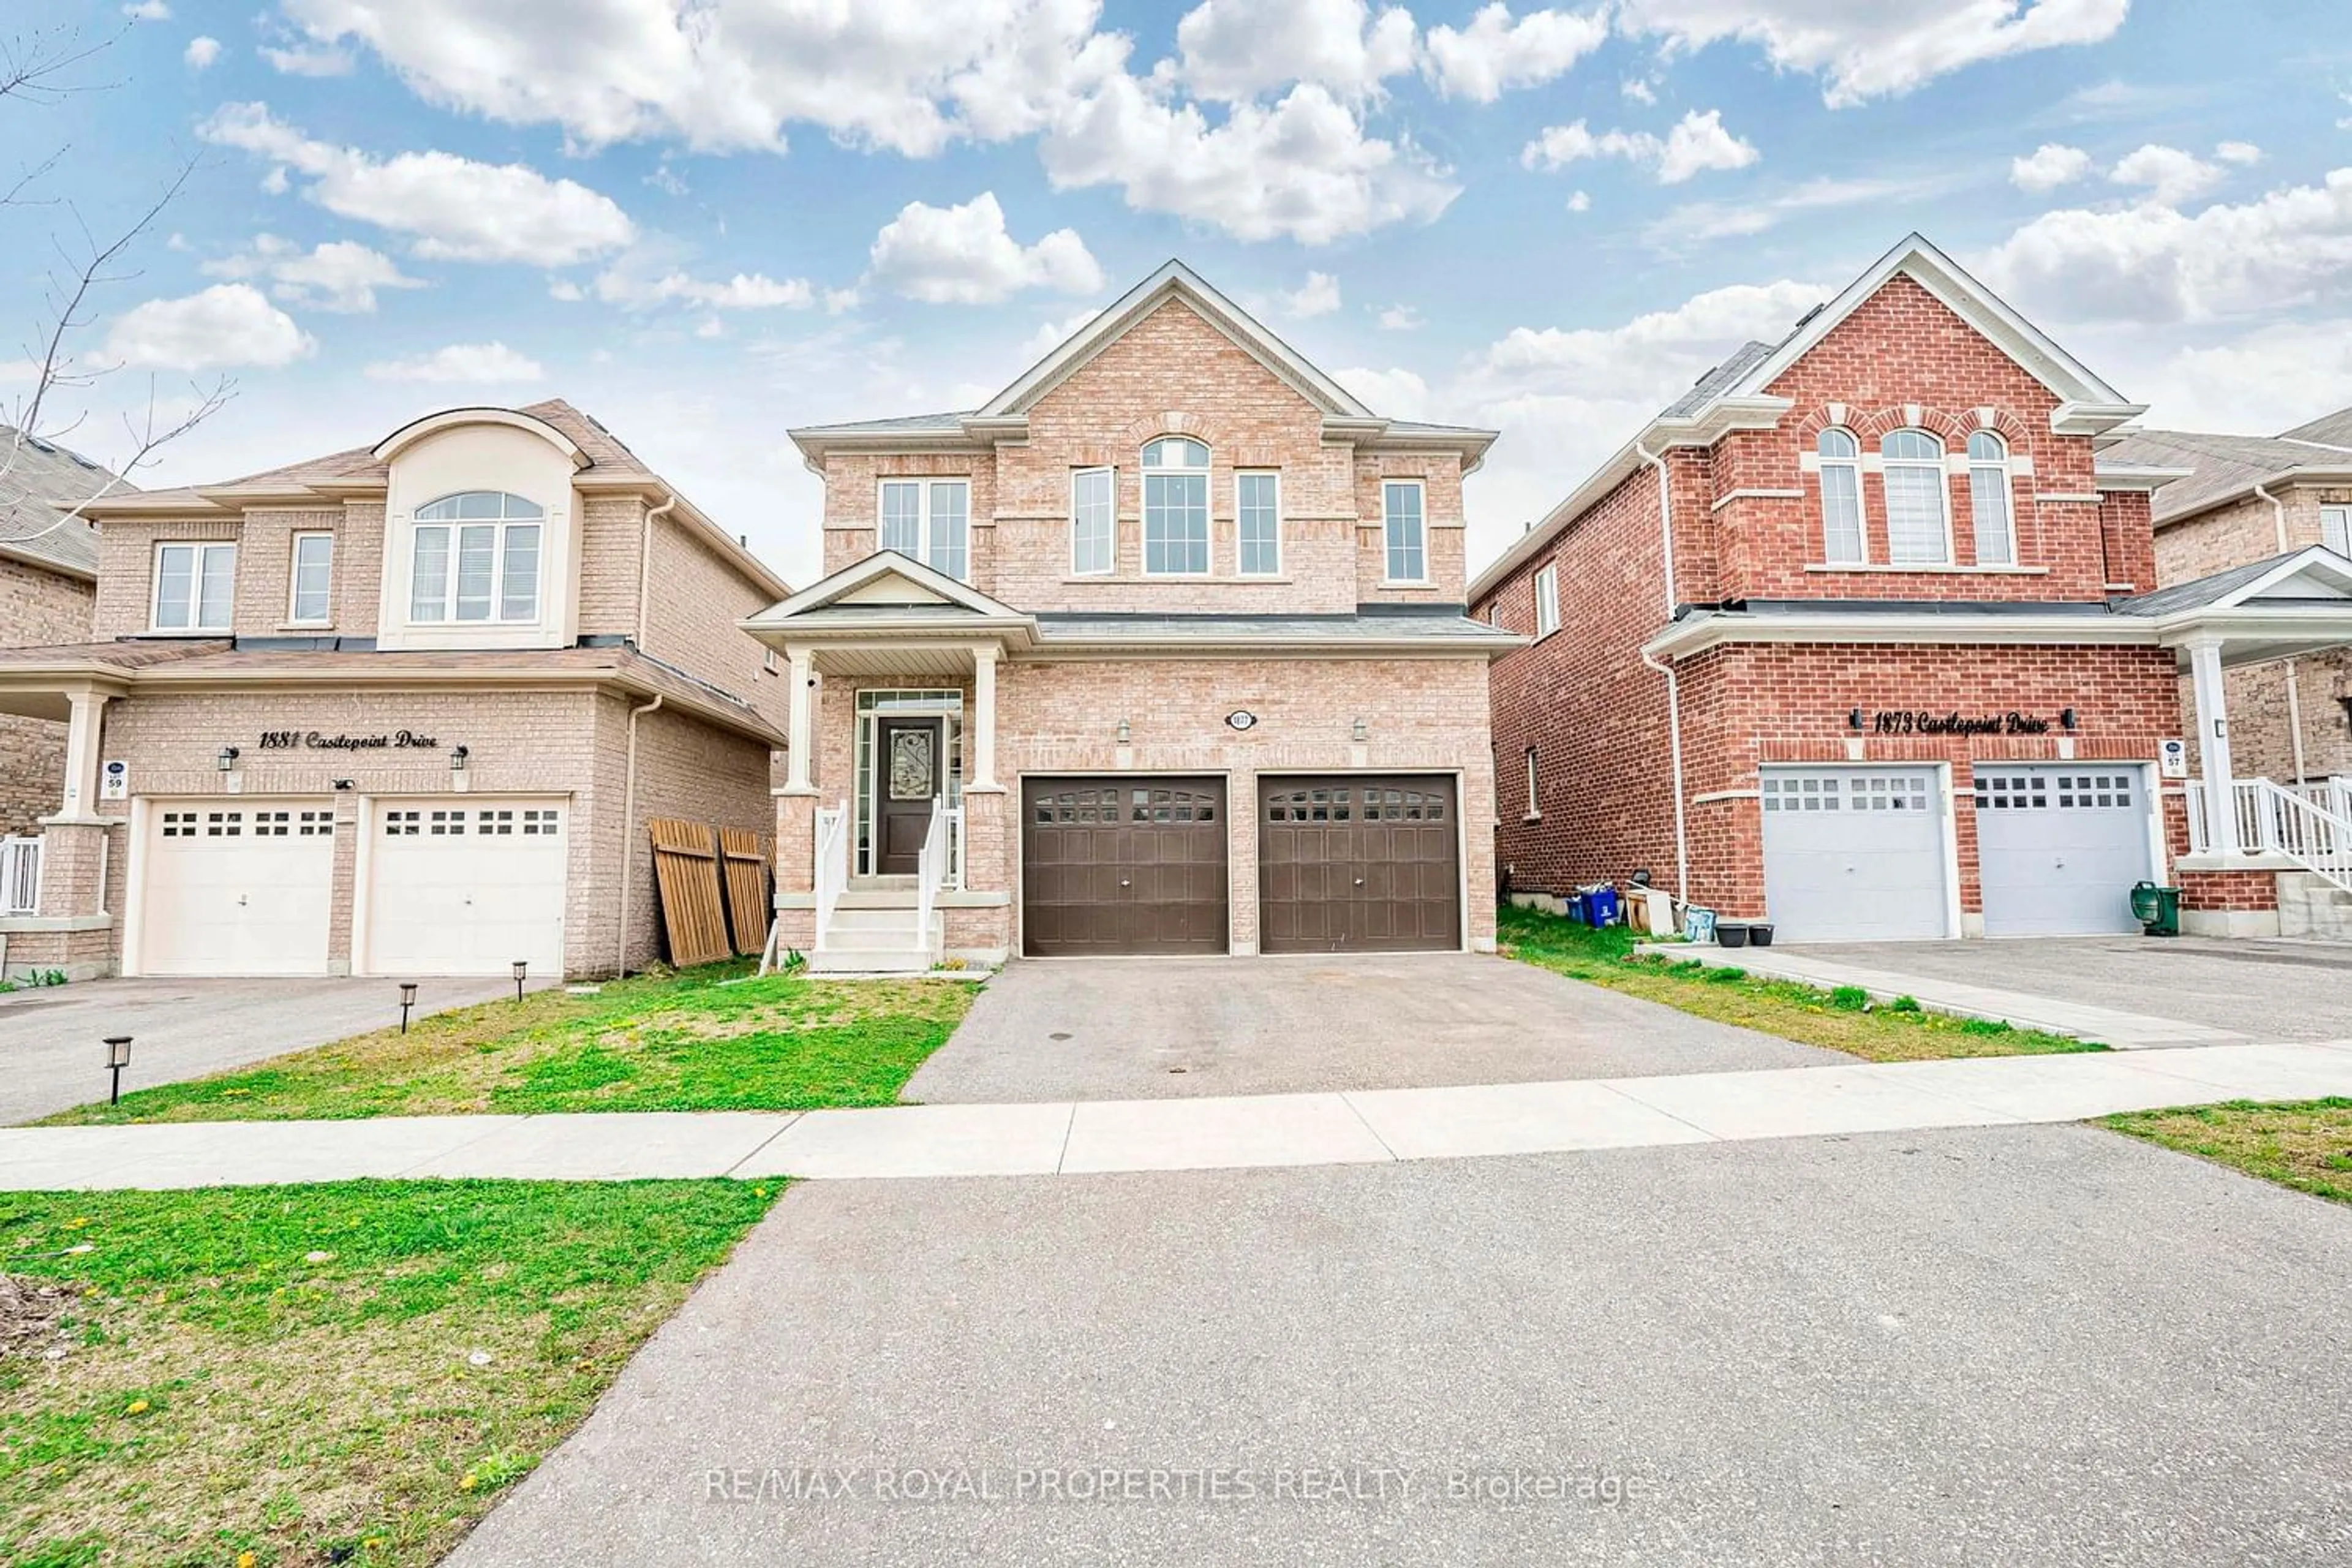 Home with brick exterior material for 1877 Castlepoint Dr, Oshawa Ontario L1K 0M9